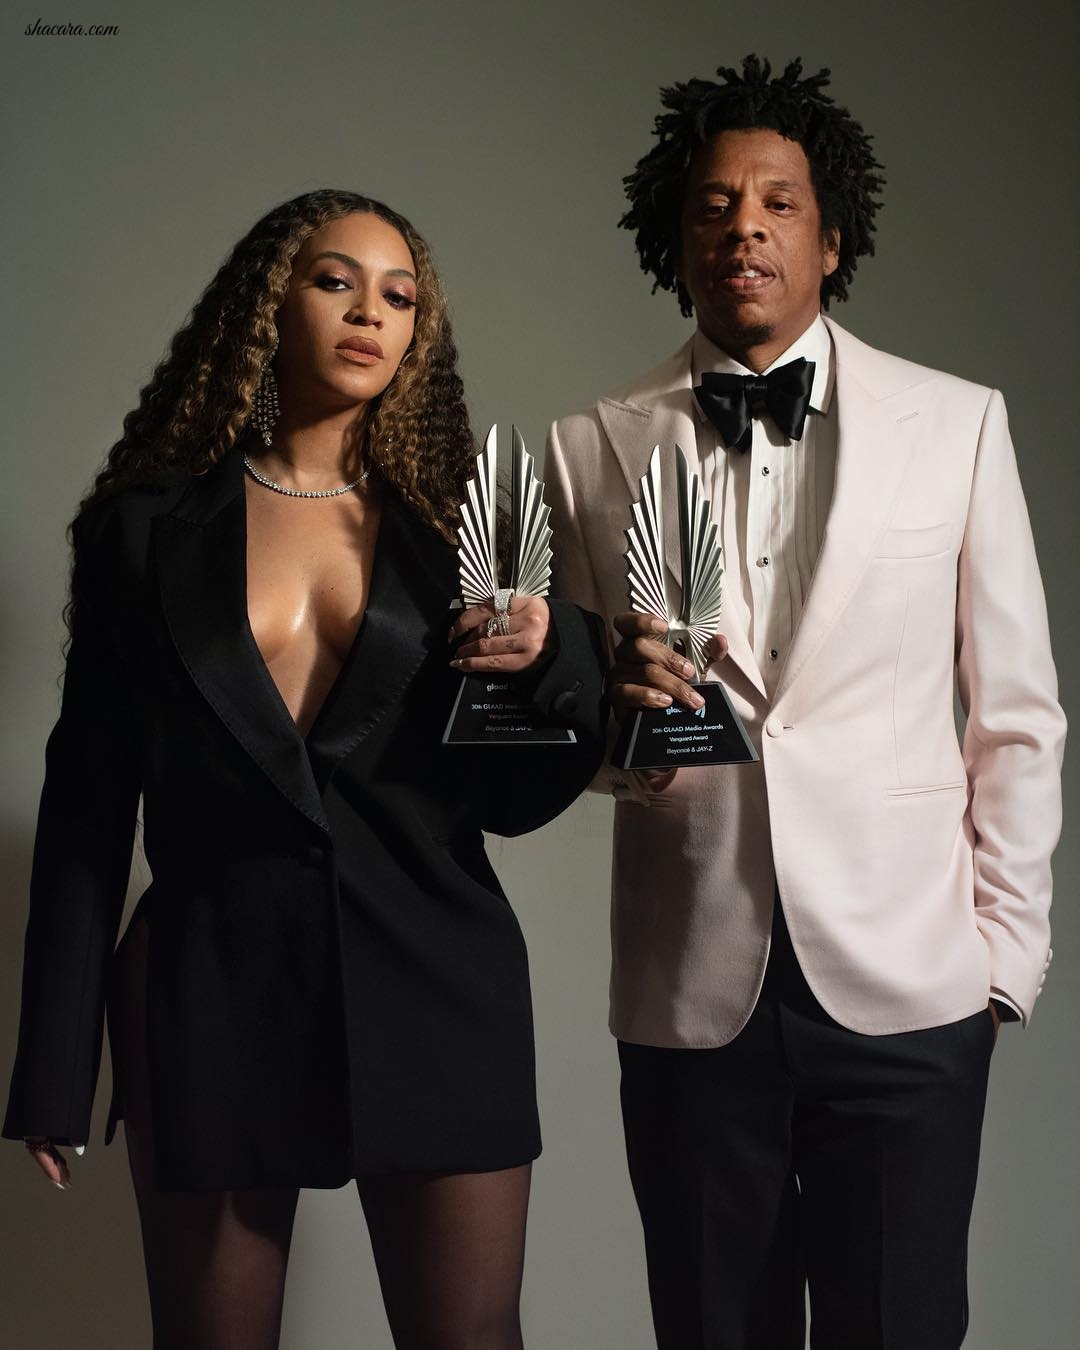 Beyoncé And Jay-Z Receive Vanguard Award For LGBTQ Advocacy At The 2019 GLAAD Awards